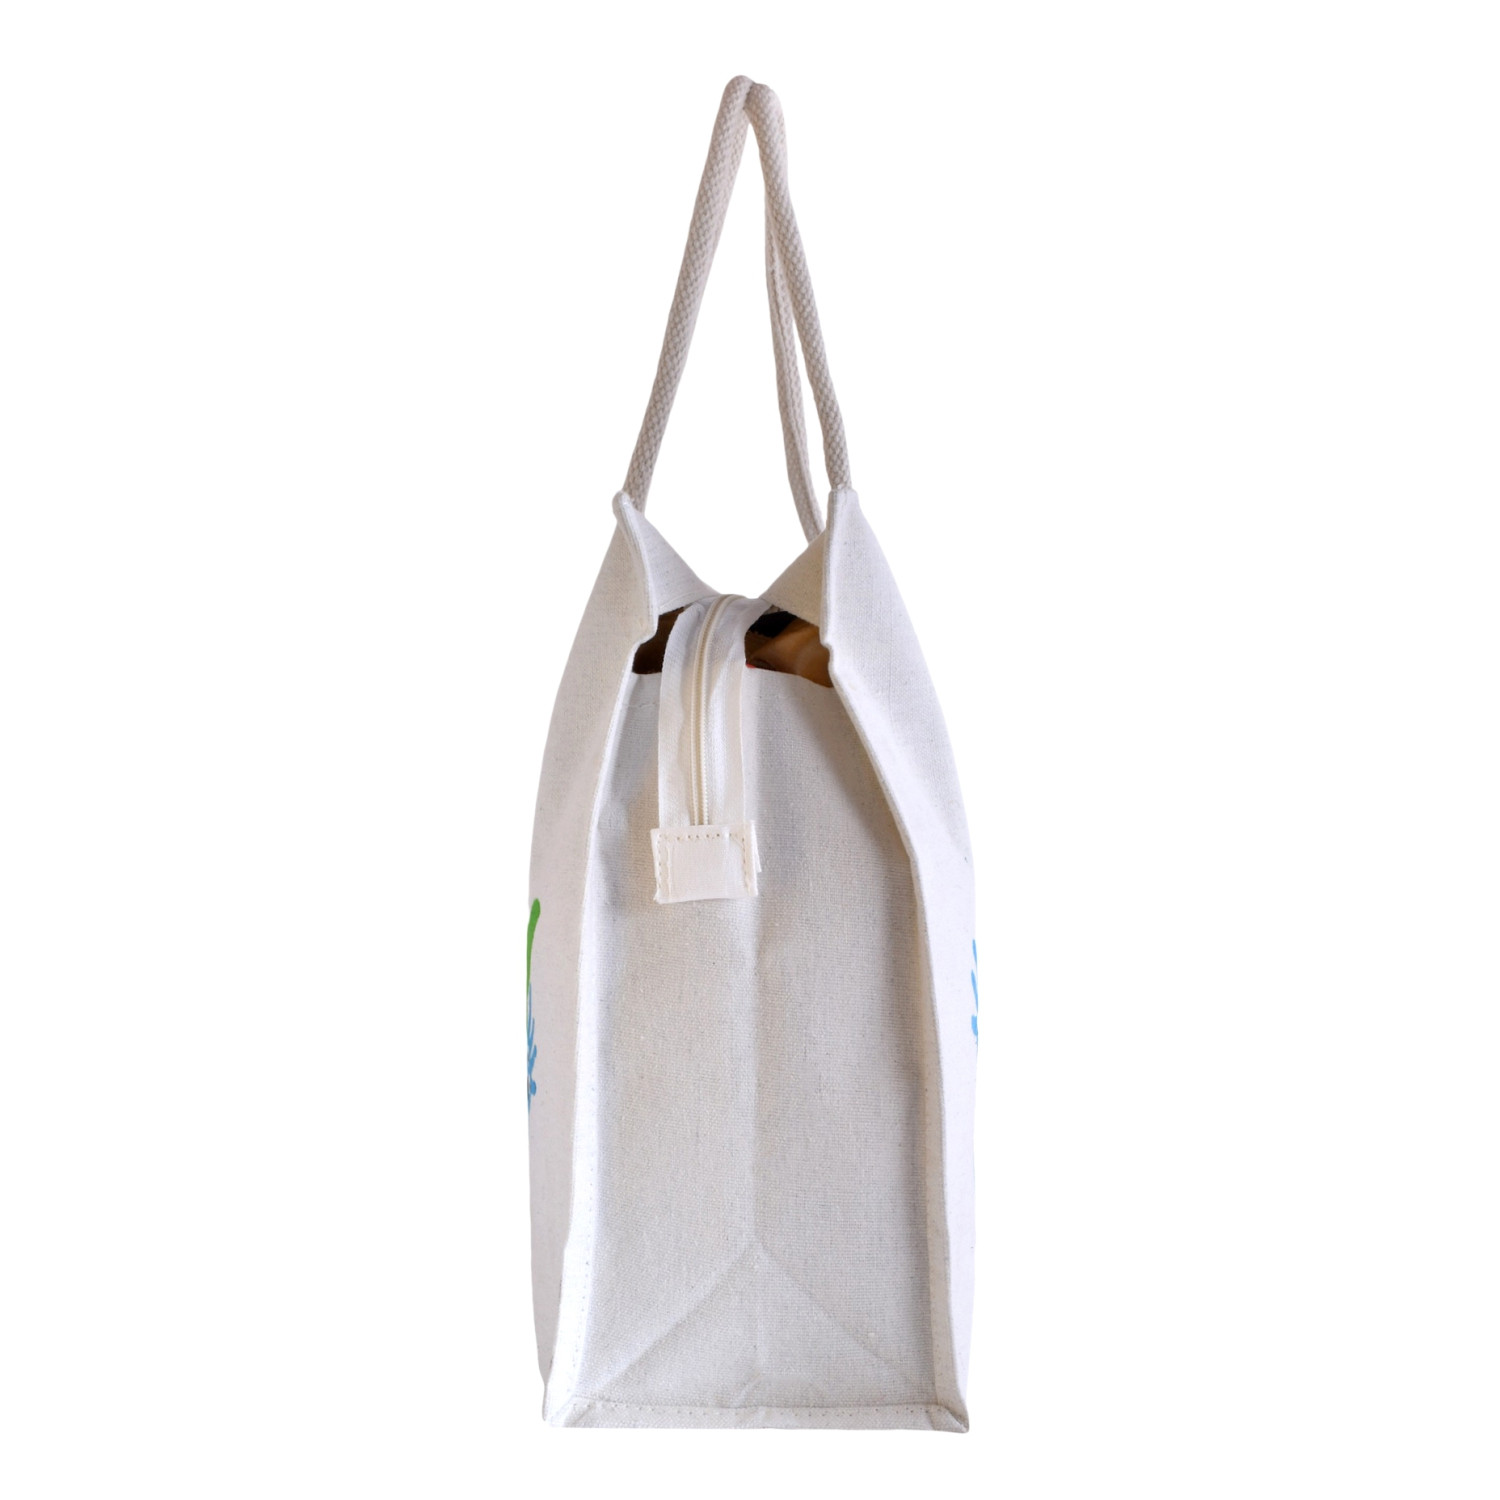 Kuber Industries Shopping Bag | Canvas Carry Bag | Zipper Grocery Bag with Handle | Reusable Shopping Bag | Vegetable Storage Bag | Hands-Grocery Bag | Large | White